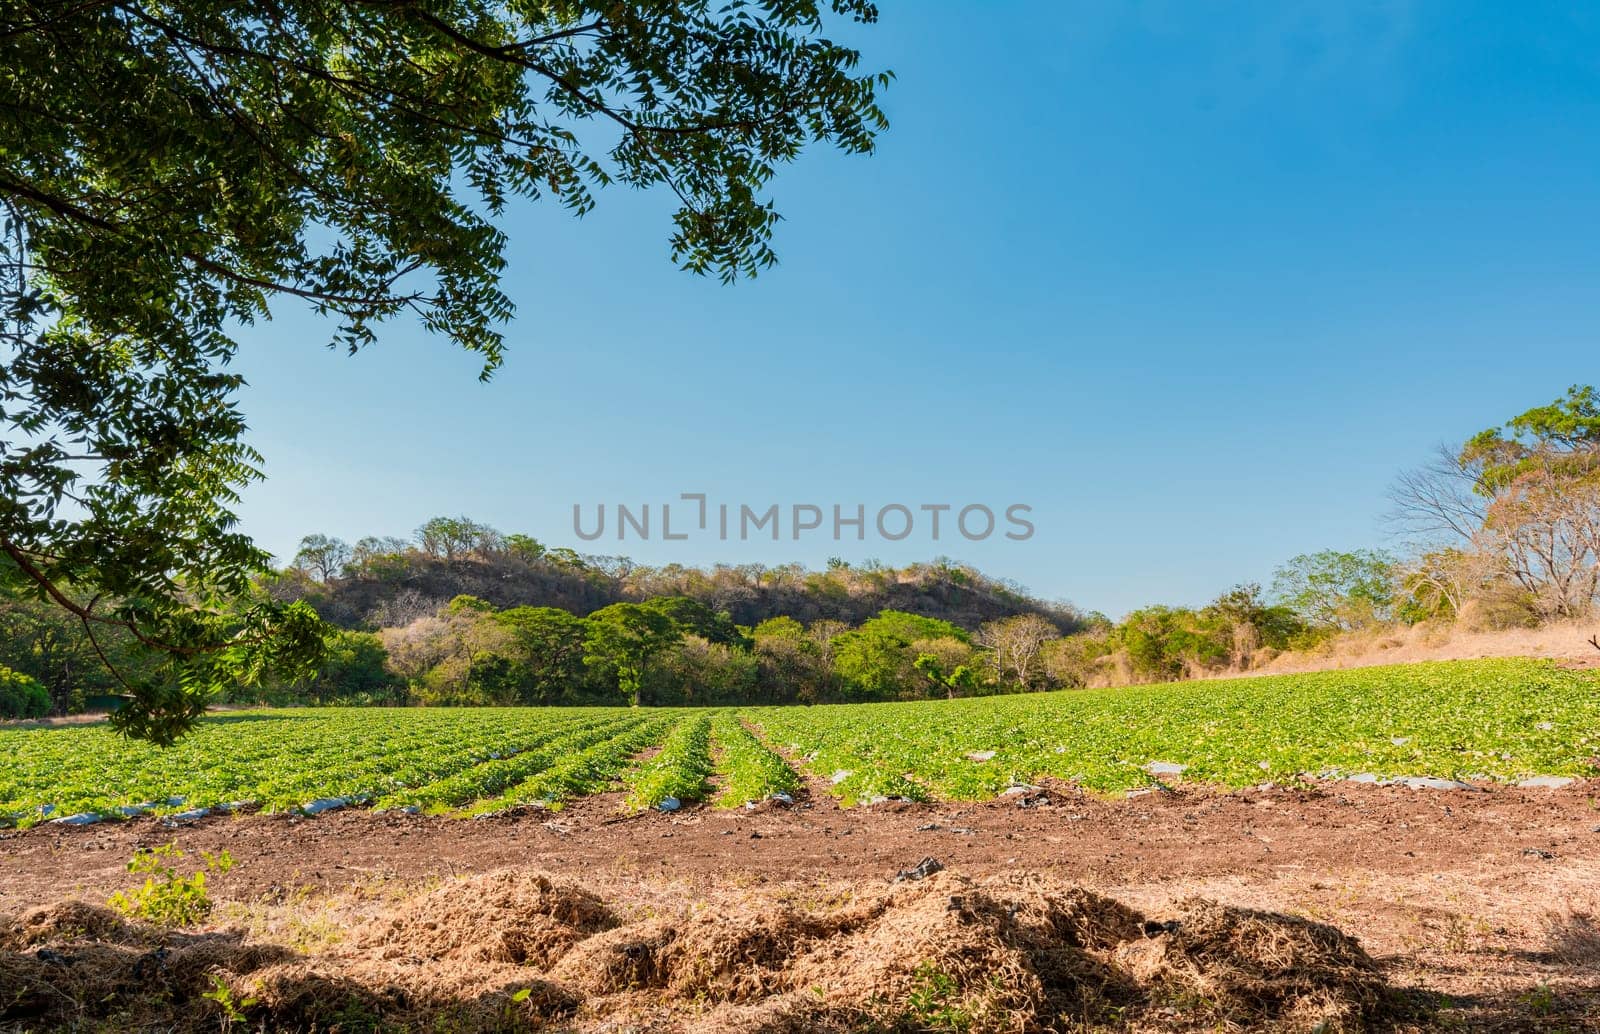 Watermelon cultivation orchard. Watermelon cultivation plot with blue sky. Cultivation and harvest of watermelon.